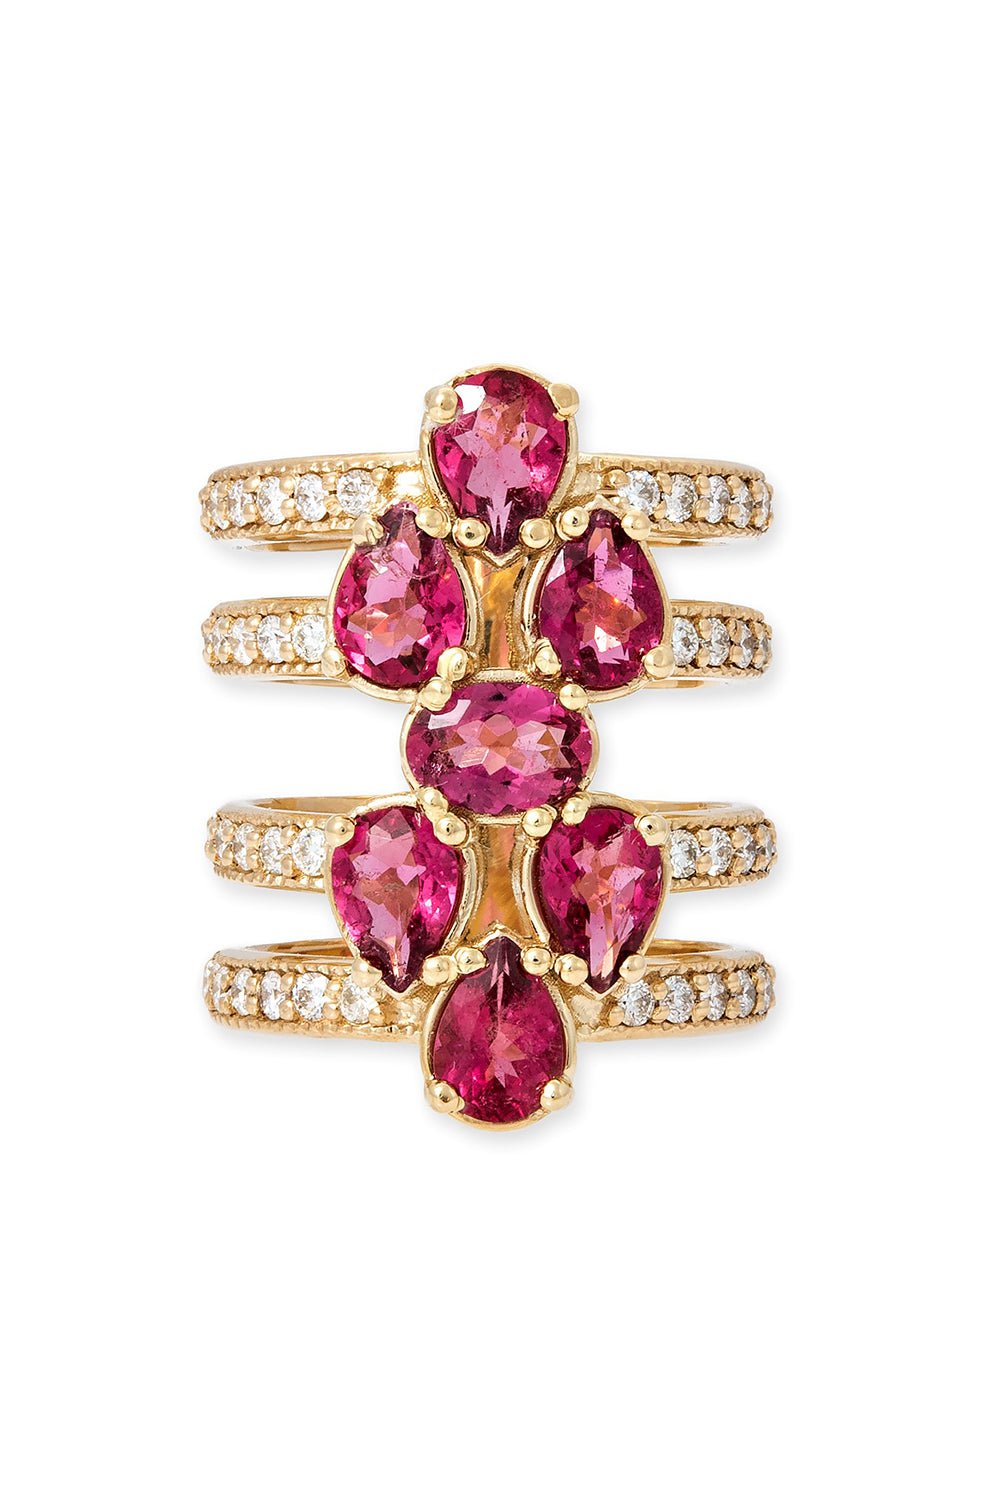 JACQUIE AICHE-Pink Tourmaline 4 Row Ring-YELLOW GOLD